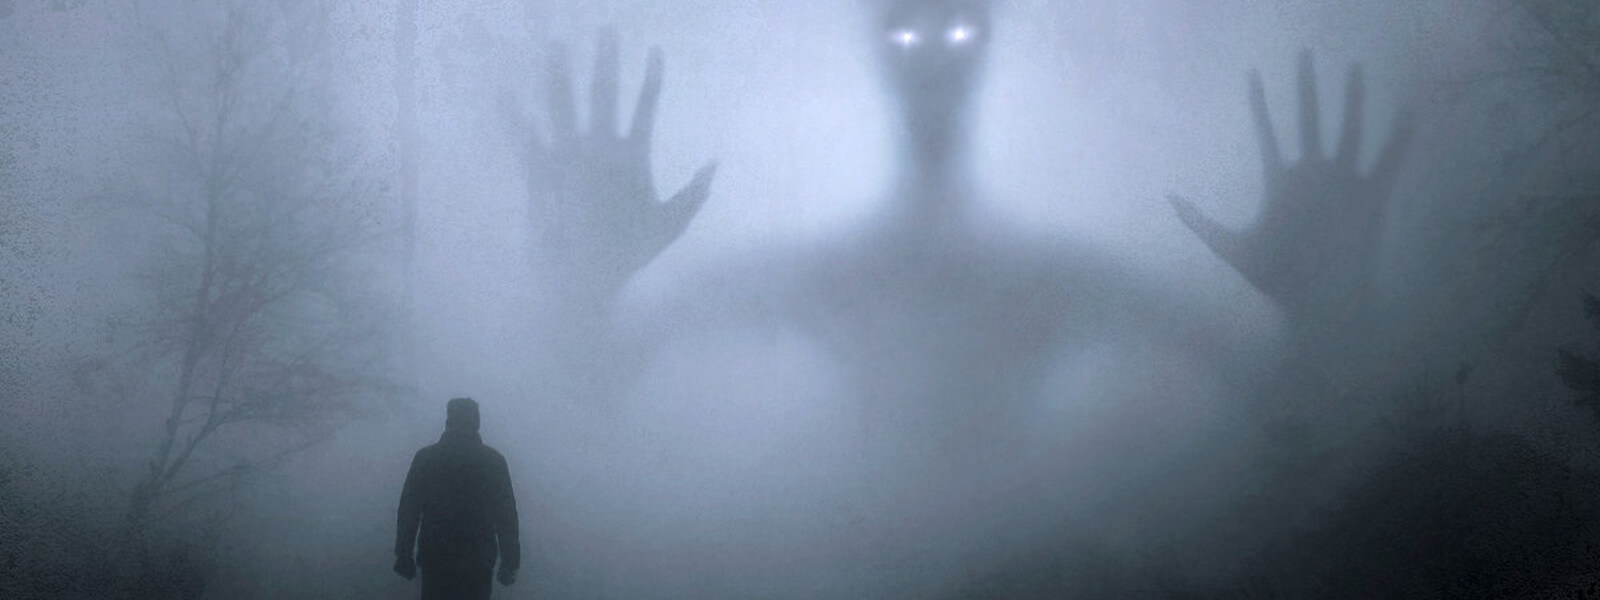 An large alien or ghost threatens a man in a misty forest.